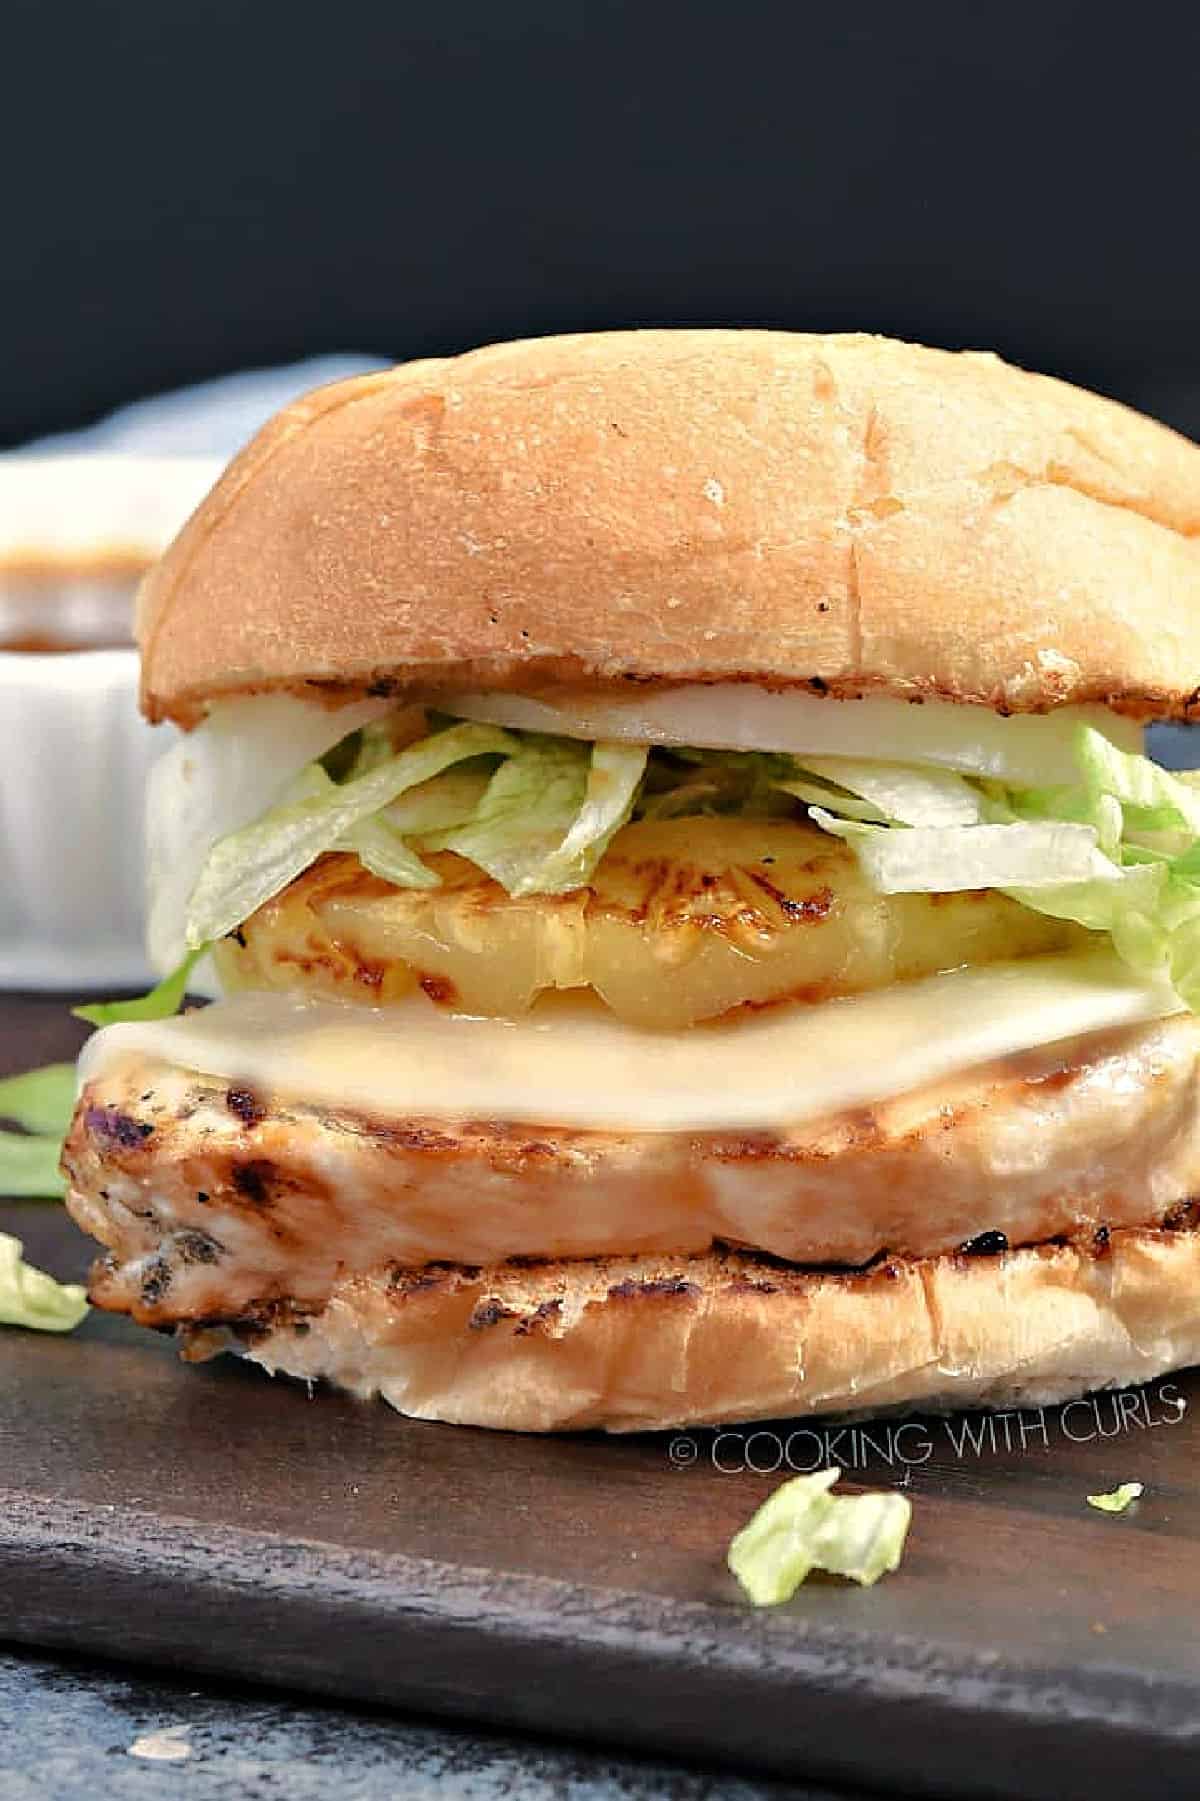 Grilled chicken breast topped with melted white cheese, grilled pineapple slice, lettuce, onion and bun.